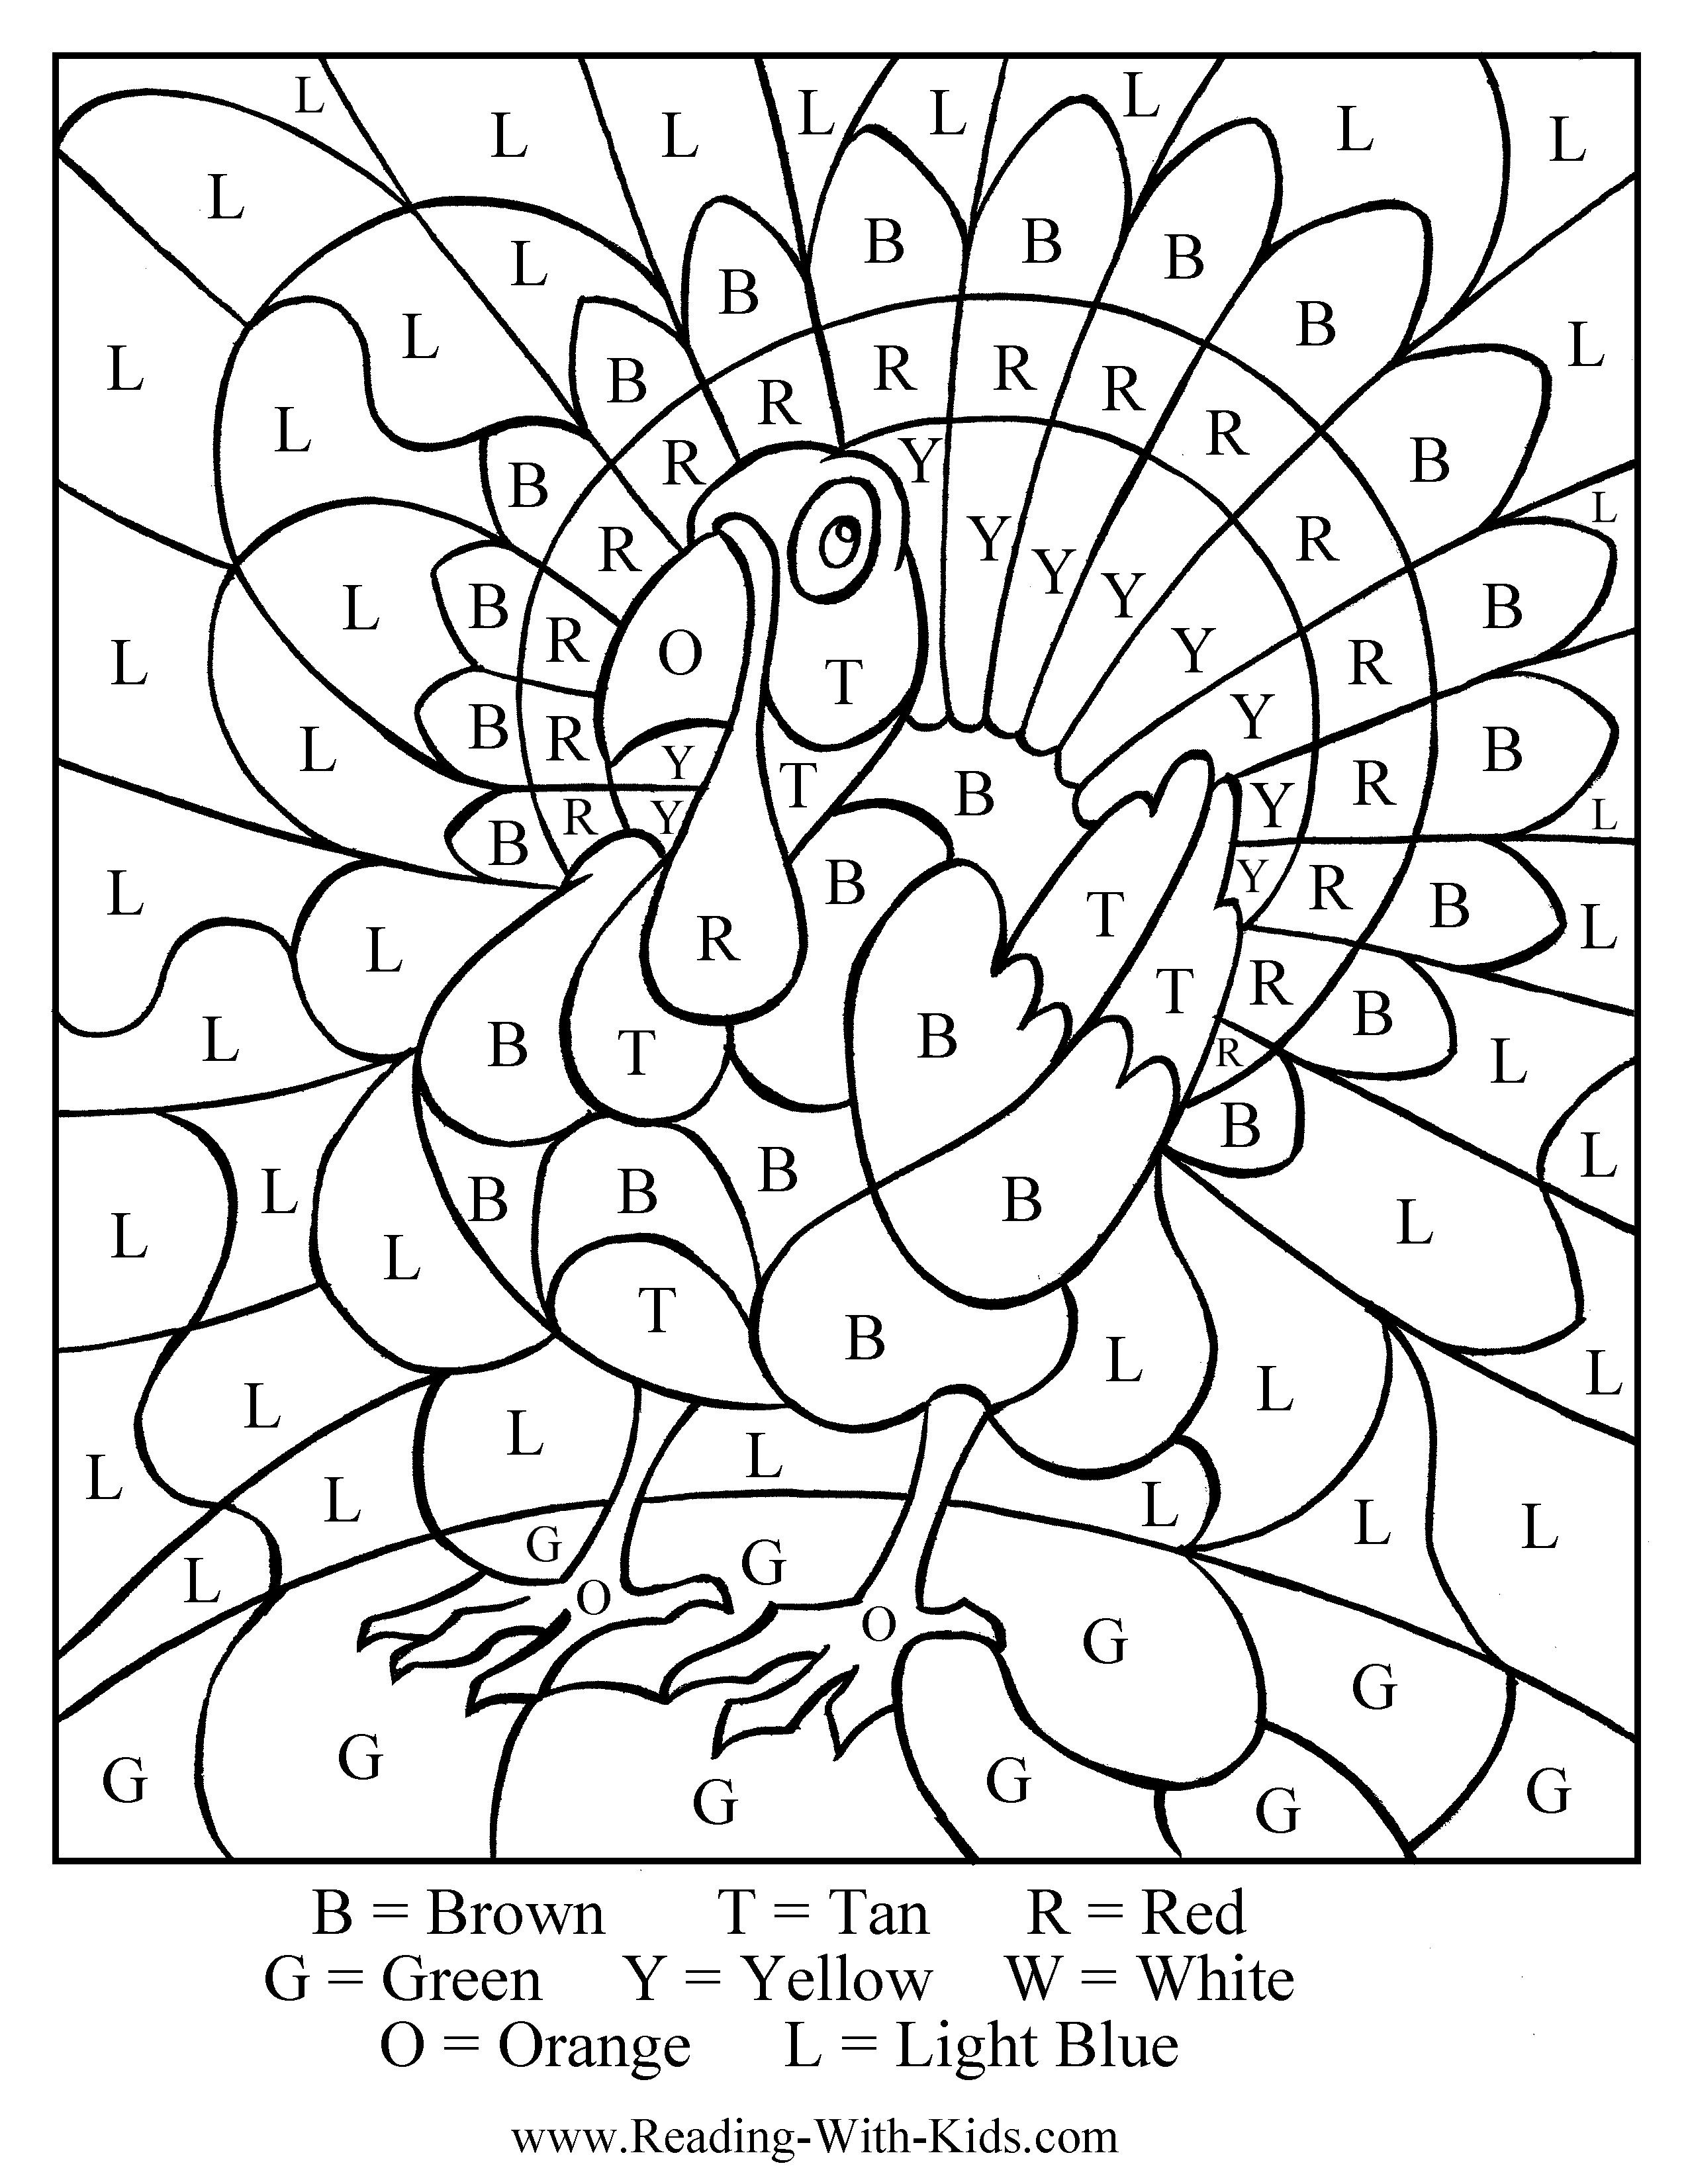 Colorletter Turkey - Great Idea For Thanksgiving #thanksgiving - Free Printable Thanksgiving Books